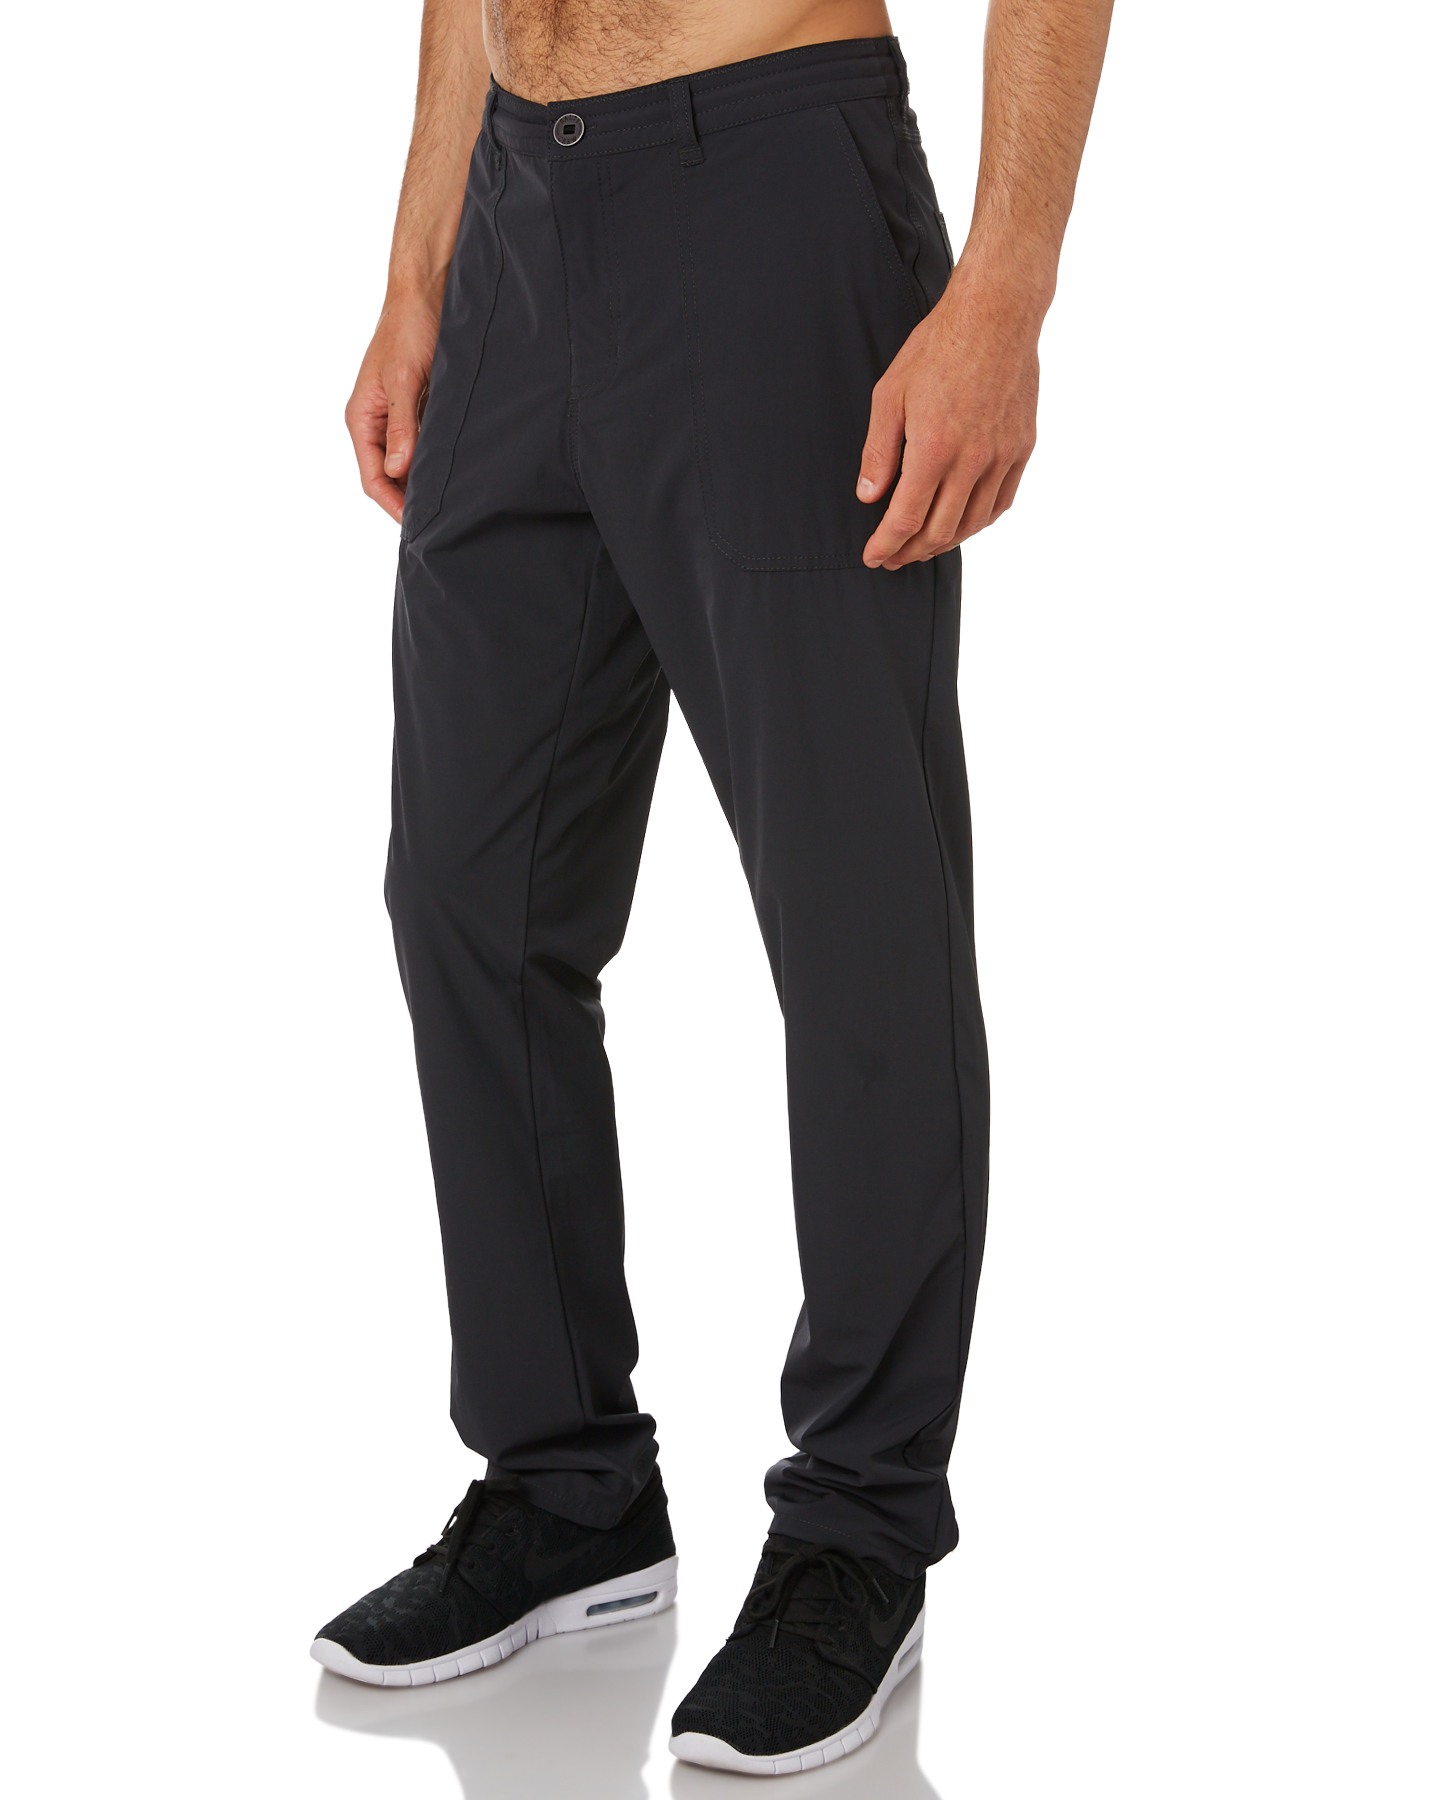 Salty Crew Breakline Mens Technical Fishing Pant - Charcoal | SurfStitch